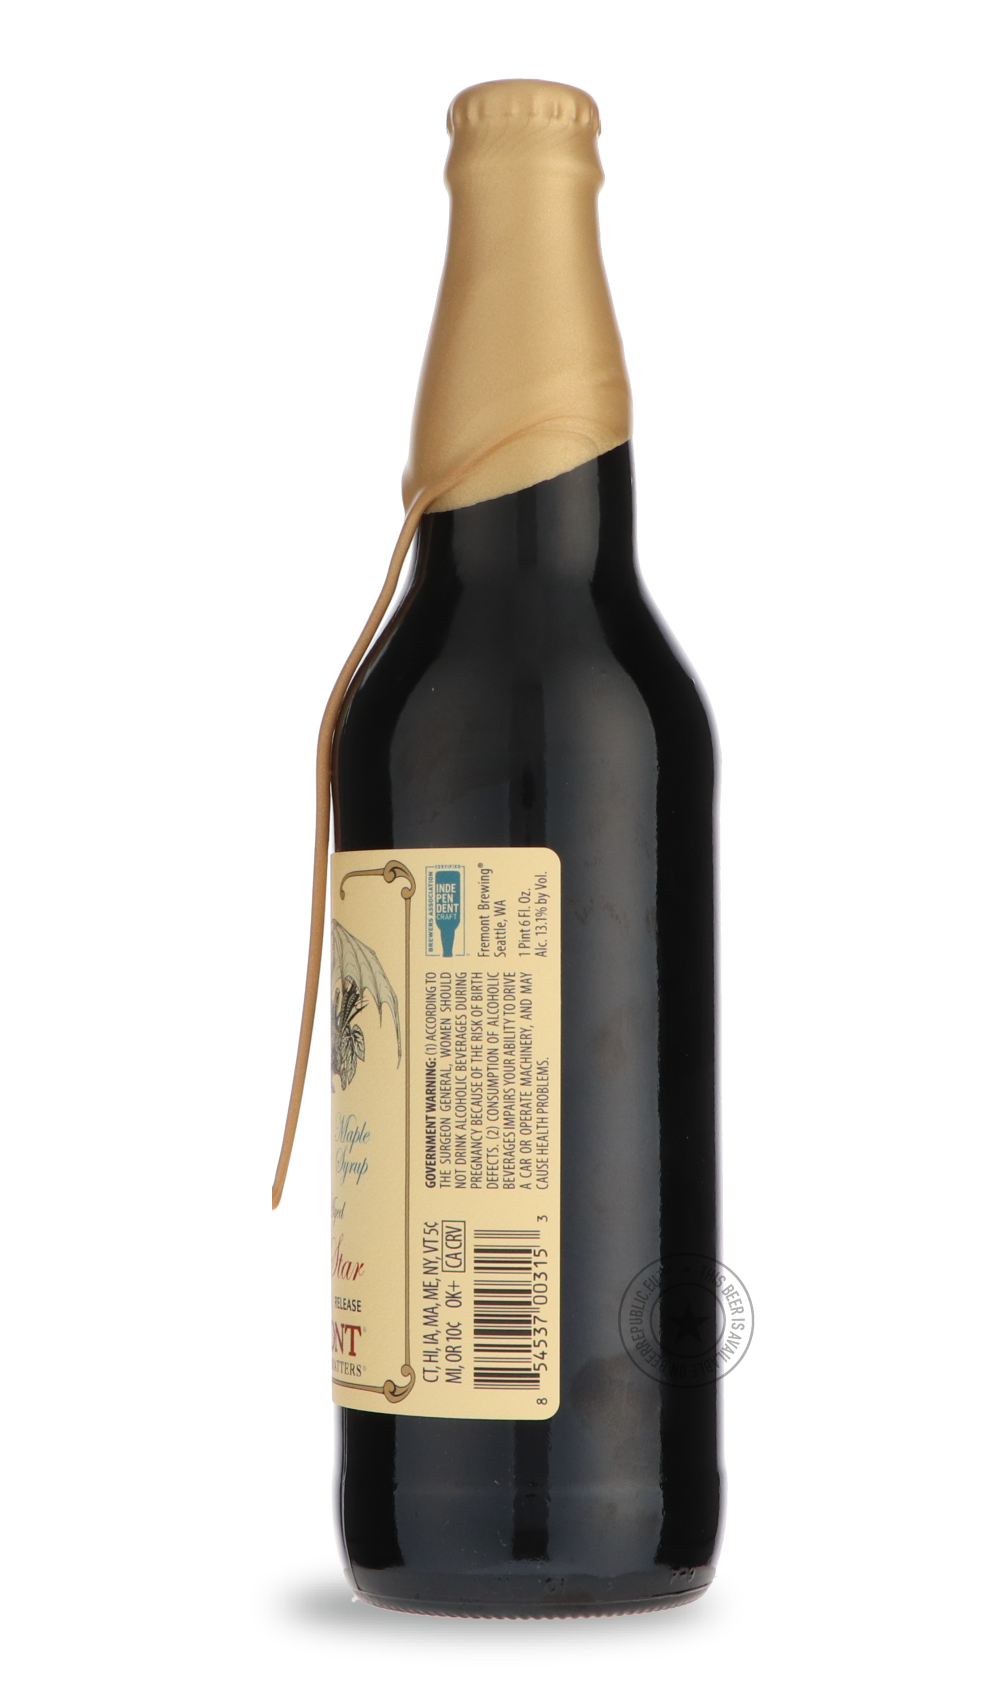 -Fremont- Bourbon Barrel Aged Dark Star: Chocolate Vanilla Maple Syrup 2019-Stout & Porter- Only @ Beer Republic - The best online beer store for American & Canadian craft beer - Buy beer online from the USA and Canada - Bier online kopen - Amerikaans bier kopen - Craft beer store - Craft beer kopen - Amerikanisch bier kaufen - Bier online kaufen - Acheter biere online - IPA - Stout - Porter - New England IPA - Hazy IPA - Imperial Stout - Barrel Aged - Barrel Aged Imperial Stout - Brown - Dark beer - Blond 